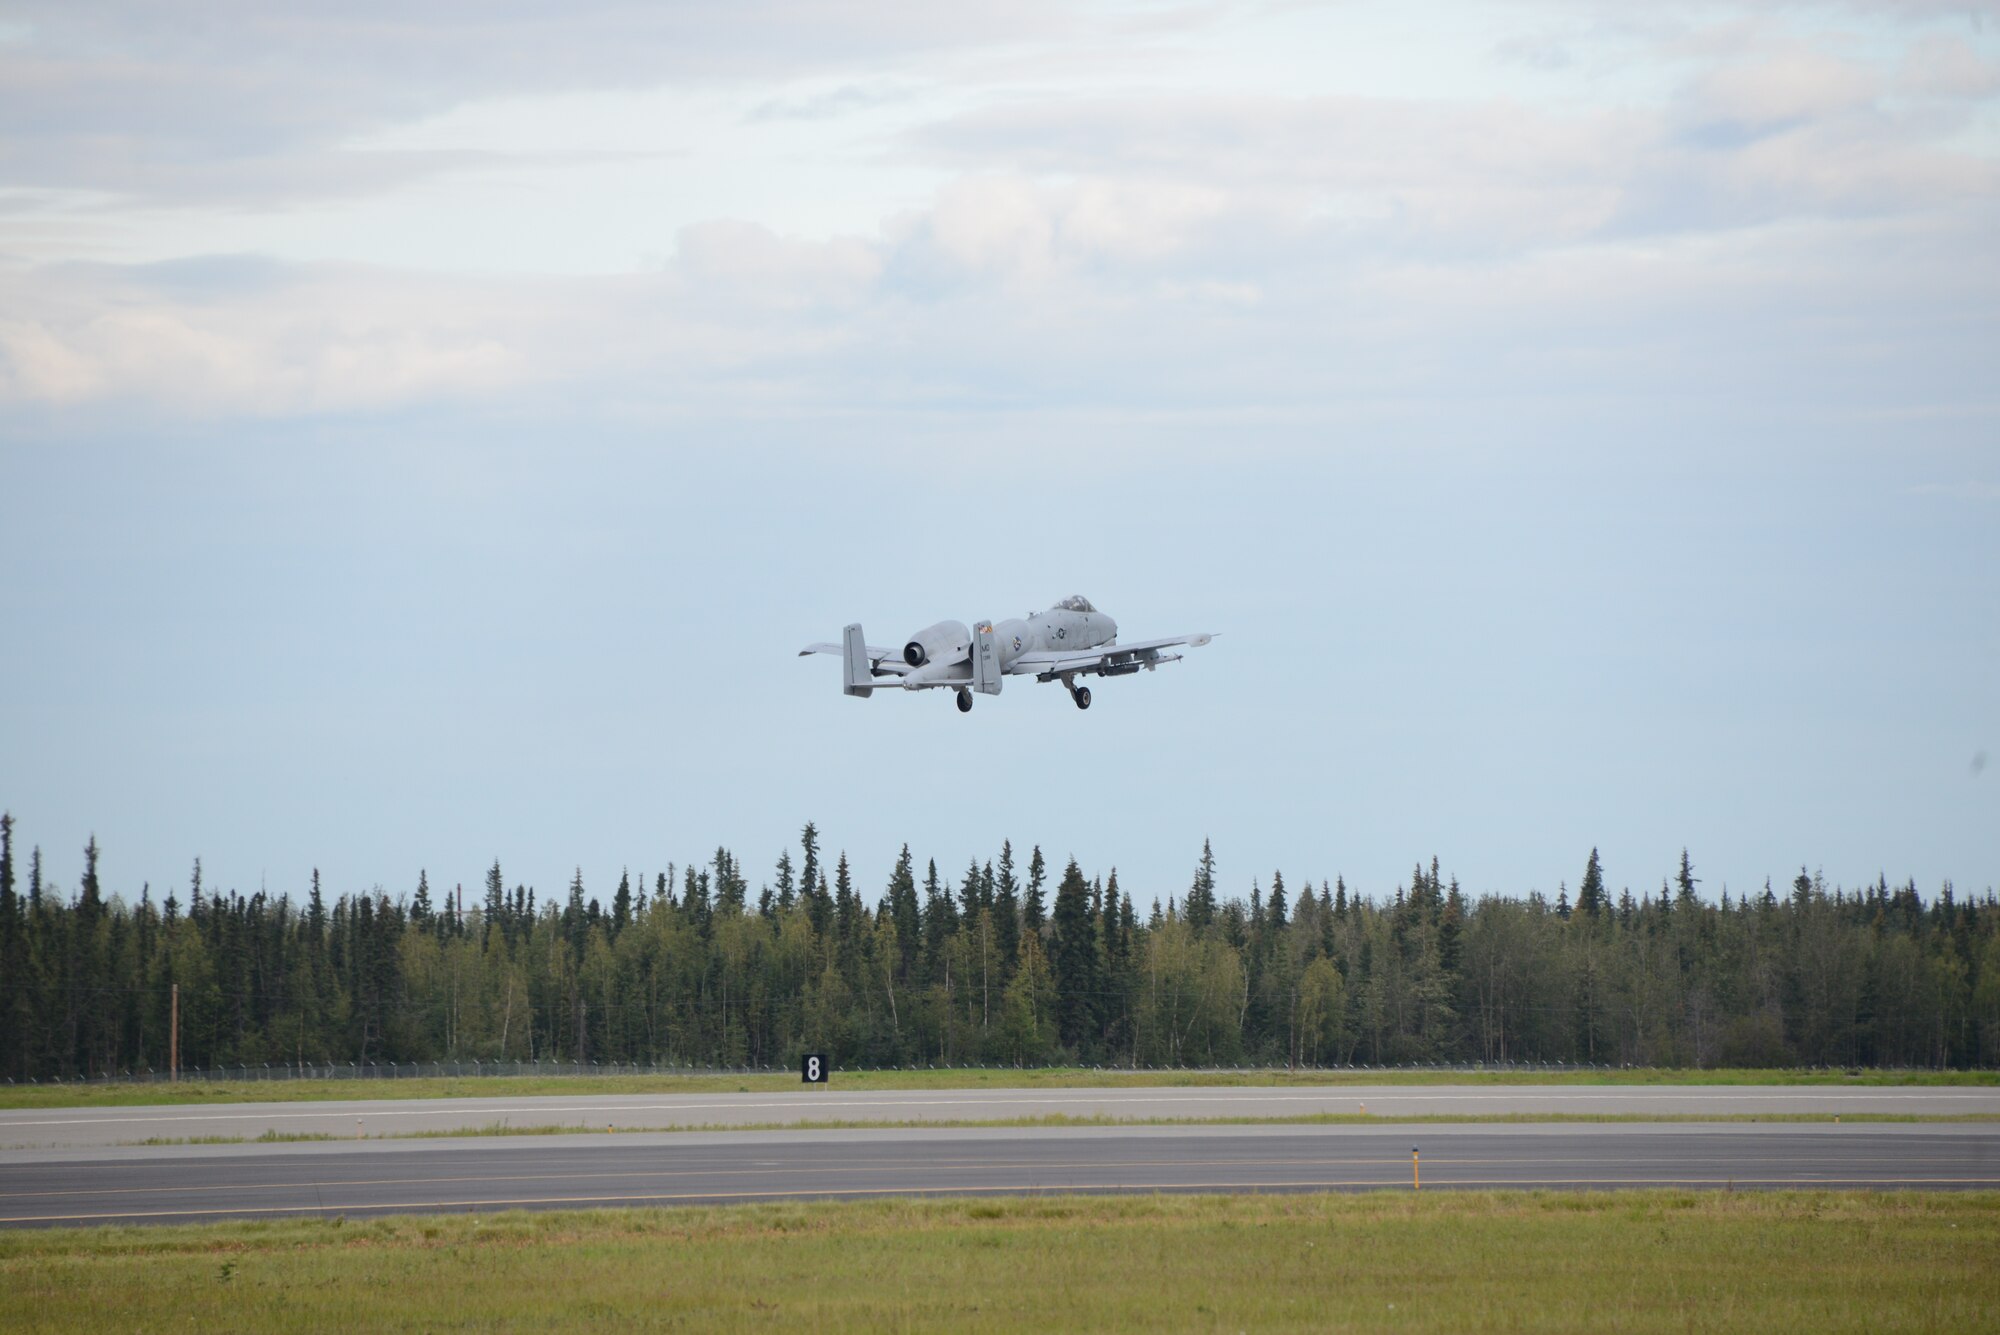 An A-10C Thunderbolt II from the Maryland Air National Guard, Baltimore, Md., takes off from Eielson Air Force Base, Ak. during Exercise Red Flag – Alaska 14-3. Exercise Red Flag – Alaska is a 10 day exercise that is a series of Pacific Air Forces commander-directed field training exercises for U.S. forces, provides joint offensive counter-air, interdiction, close air support, and large force employment training in a simulated combat environment. (Air National Guard photo by Tech. Sgt. Christopher Schepers/RELEASED)